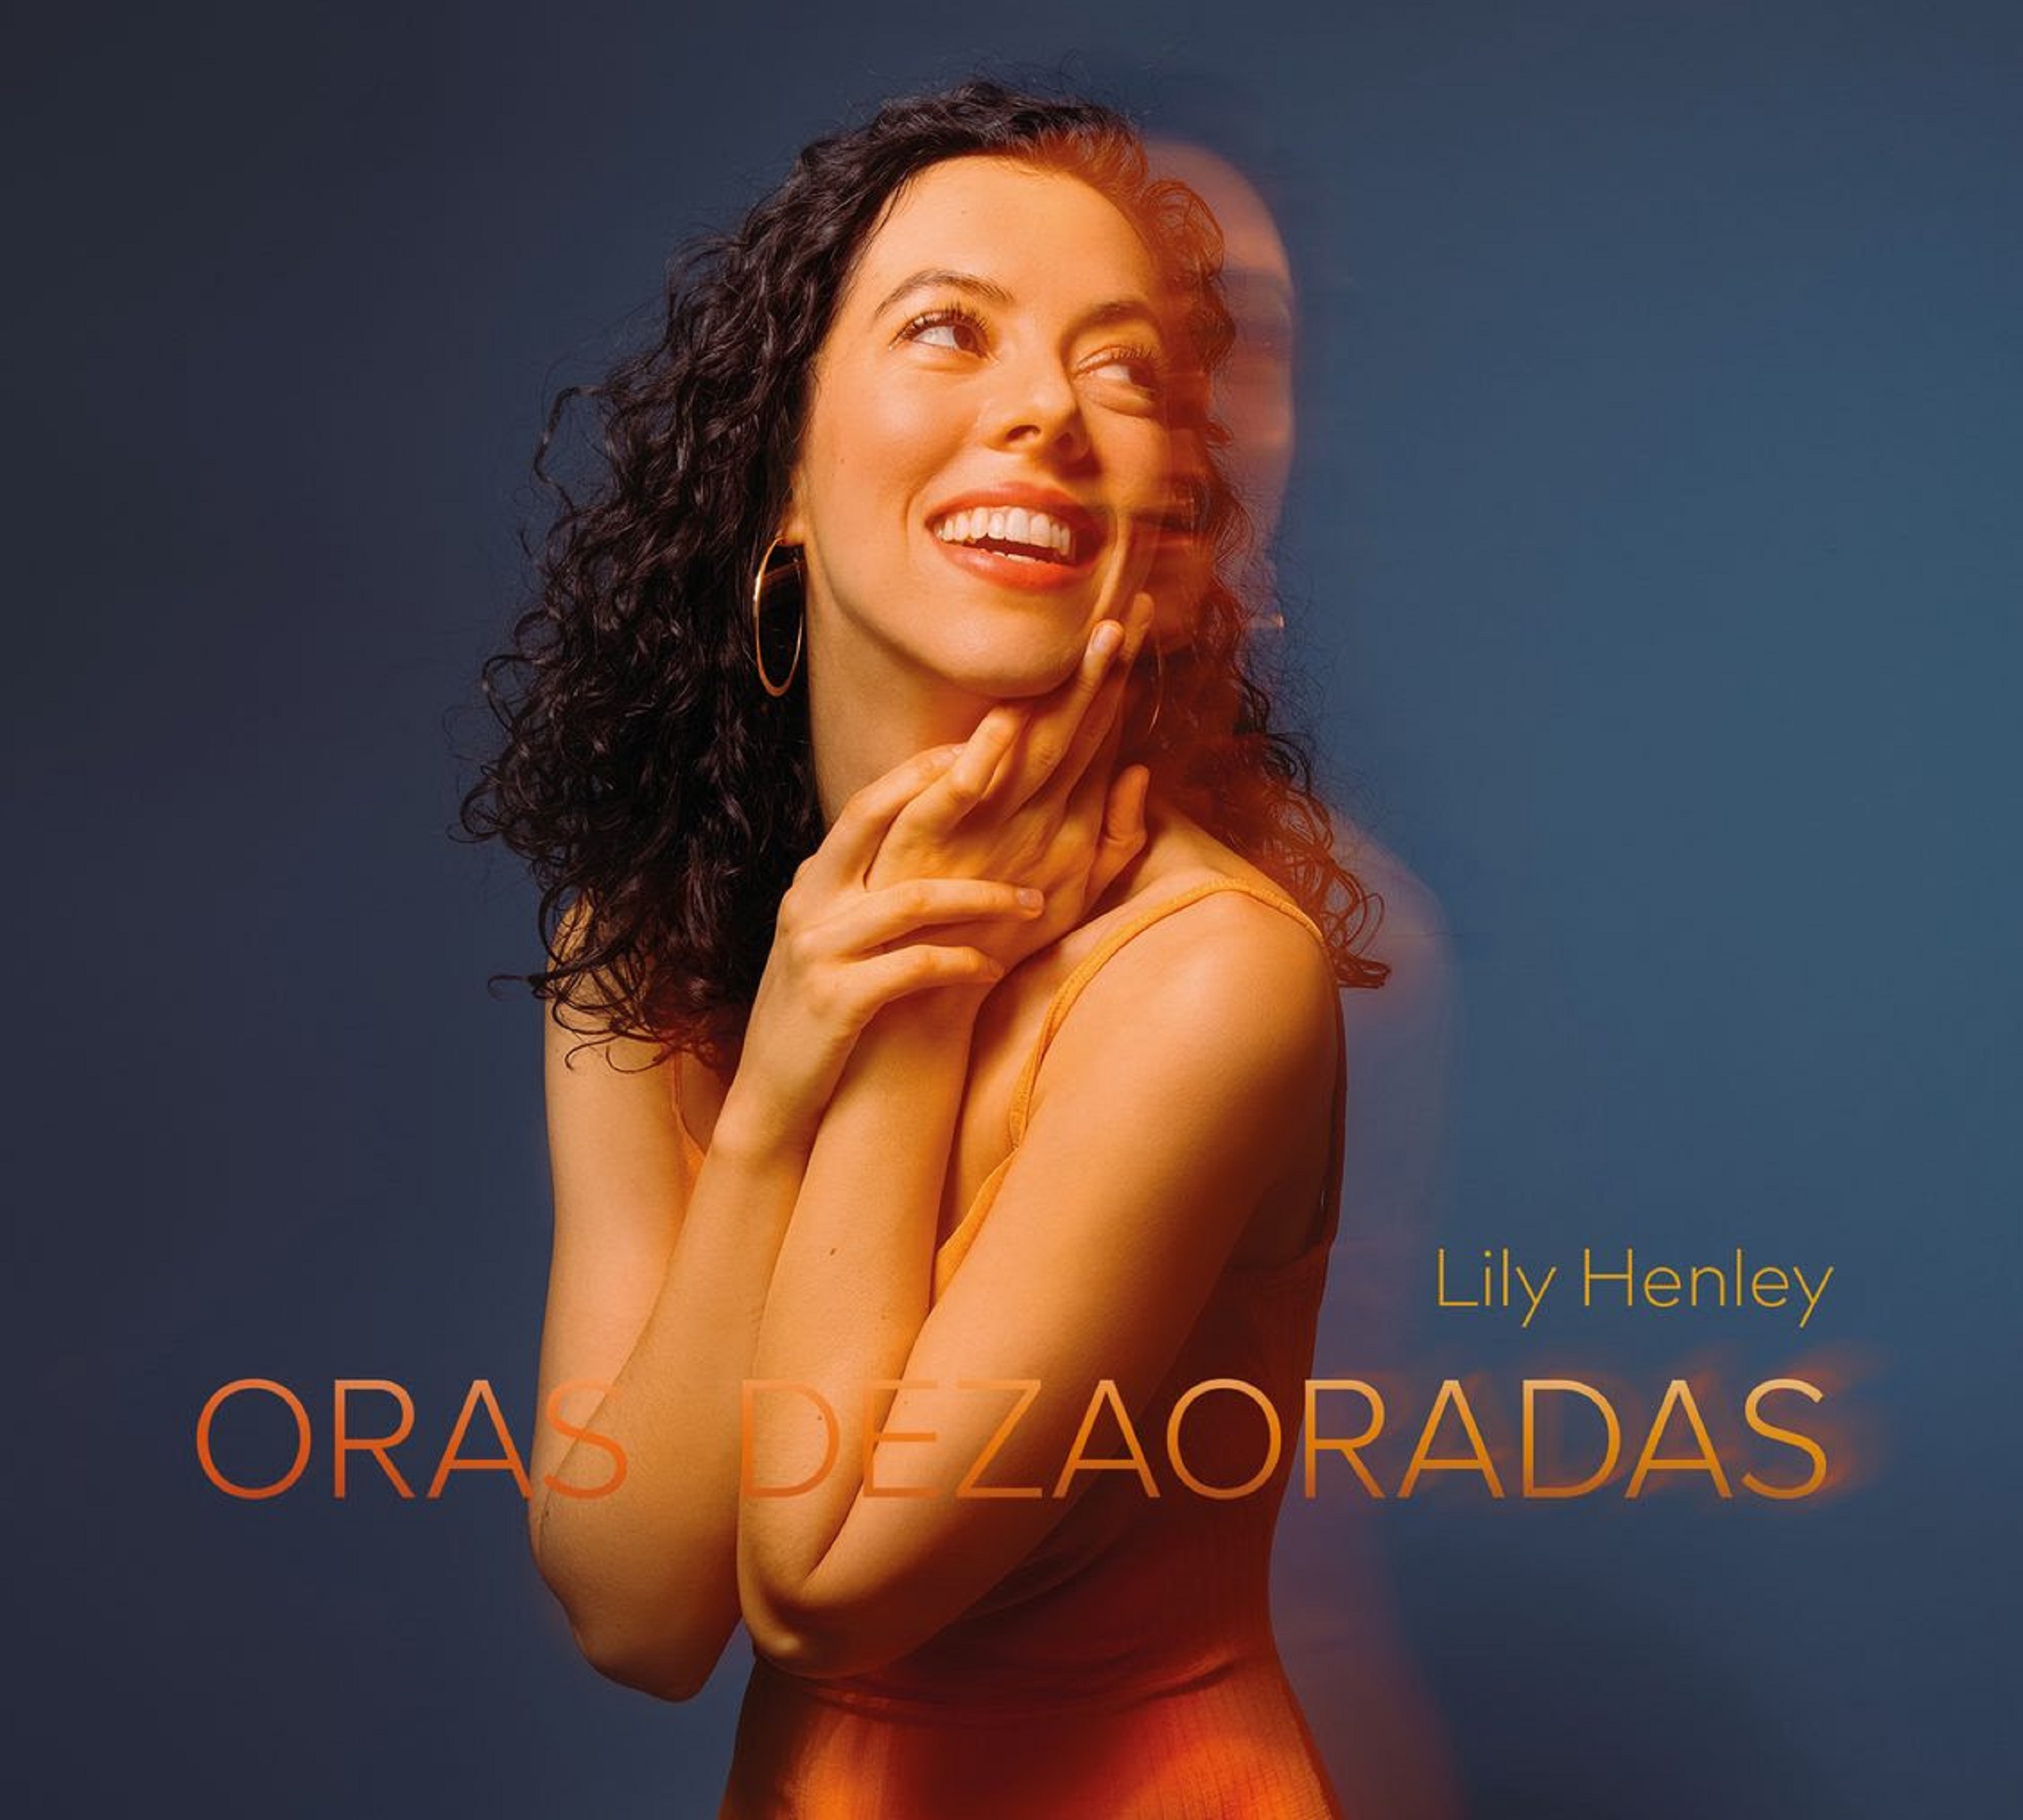 Lily Henley’s powerful album reworking and writing Sephardic songs in Ladino is out now